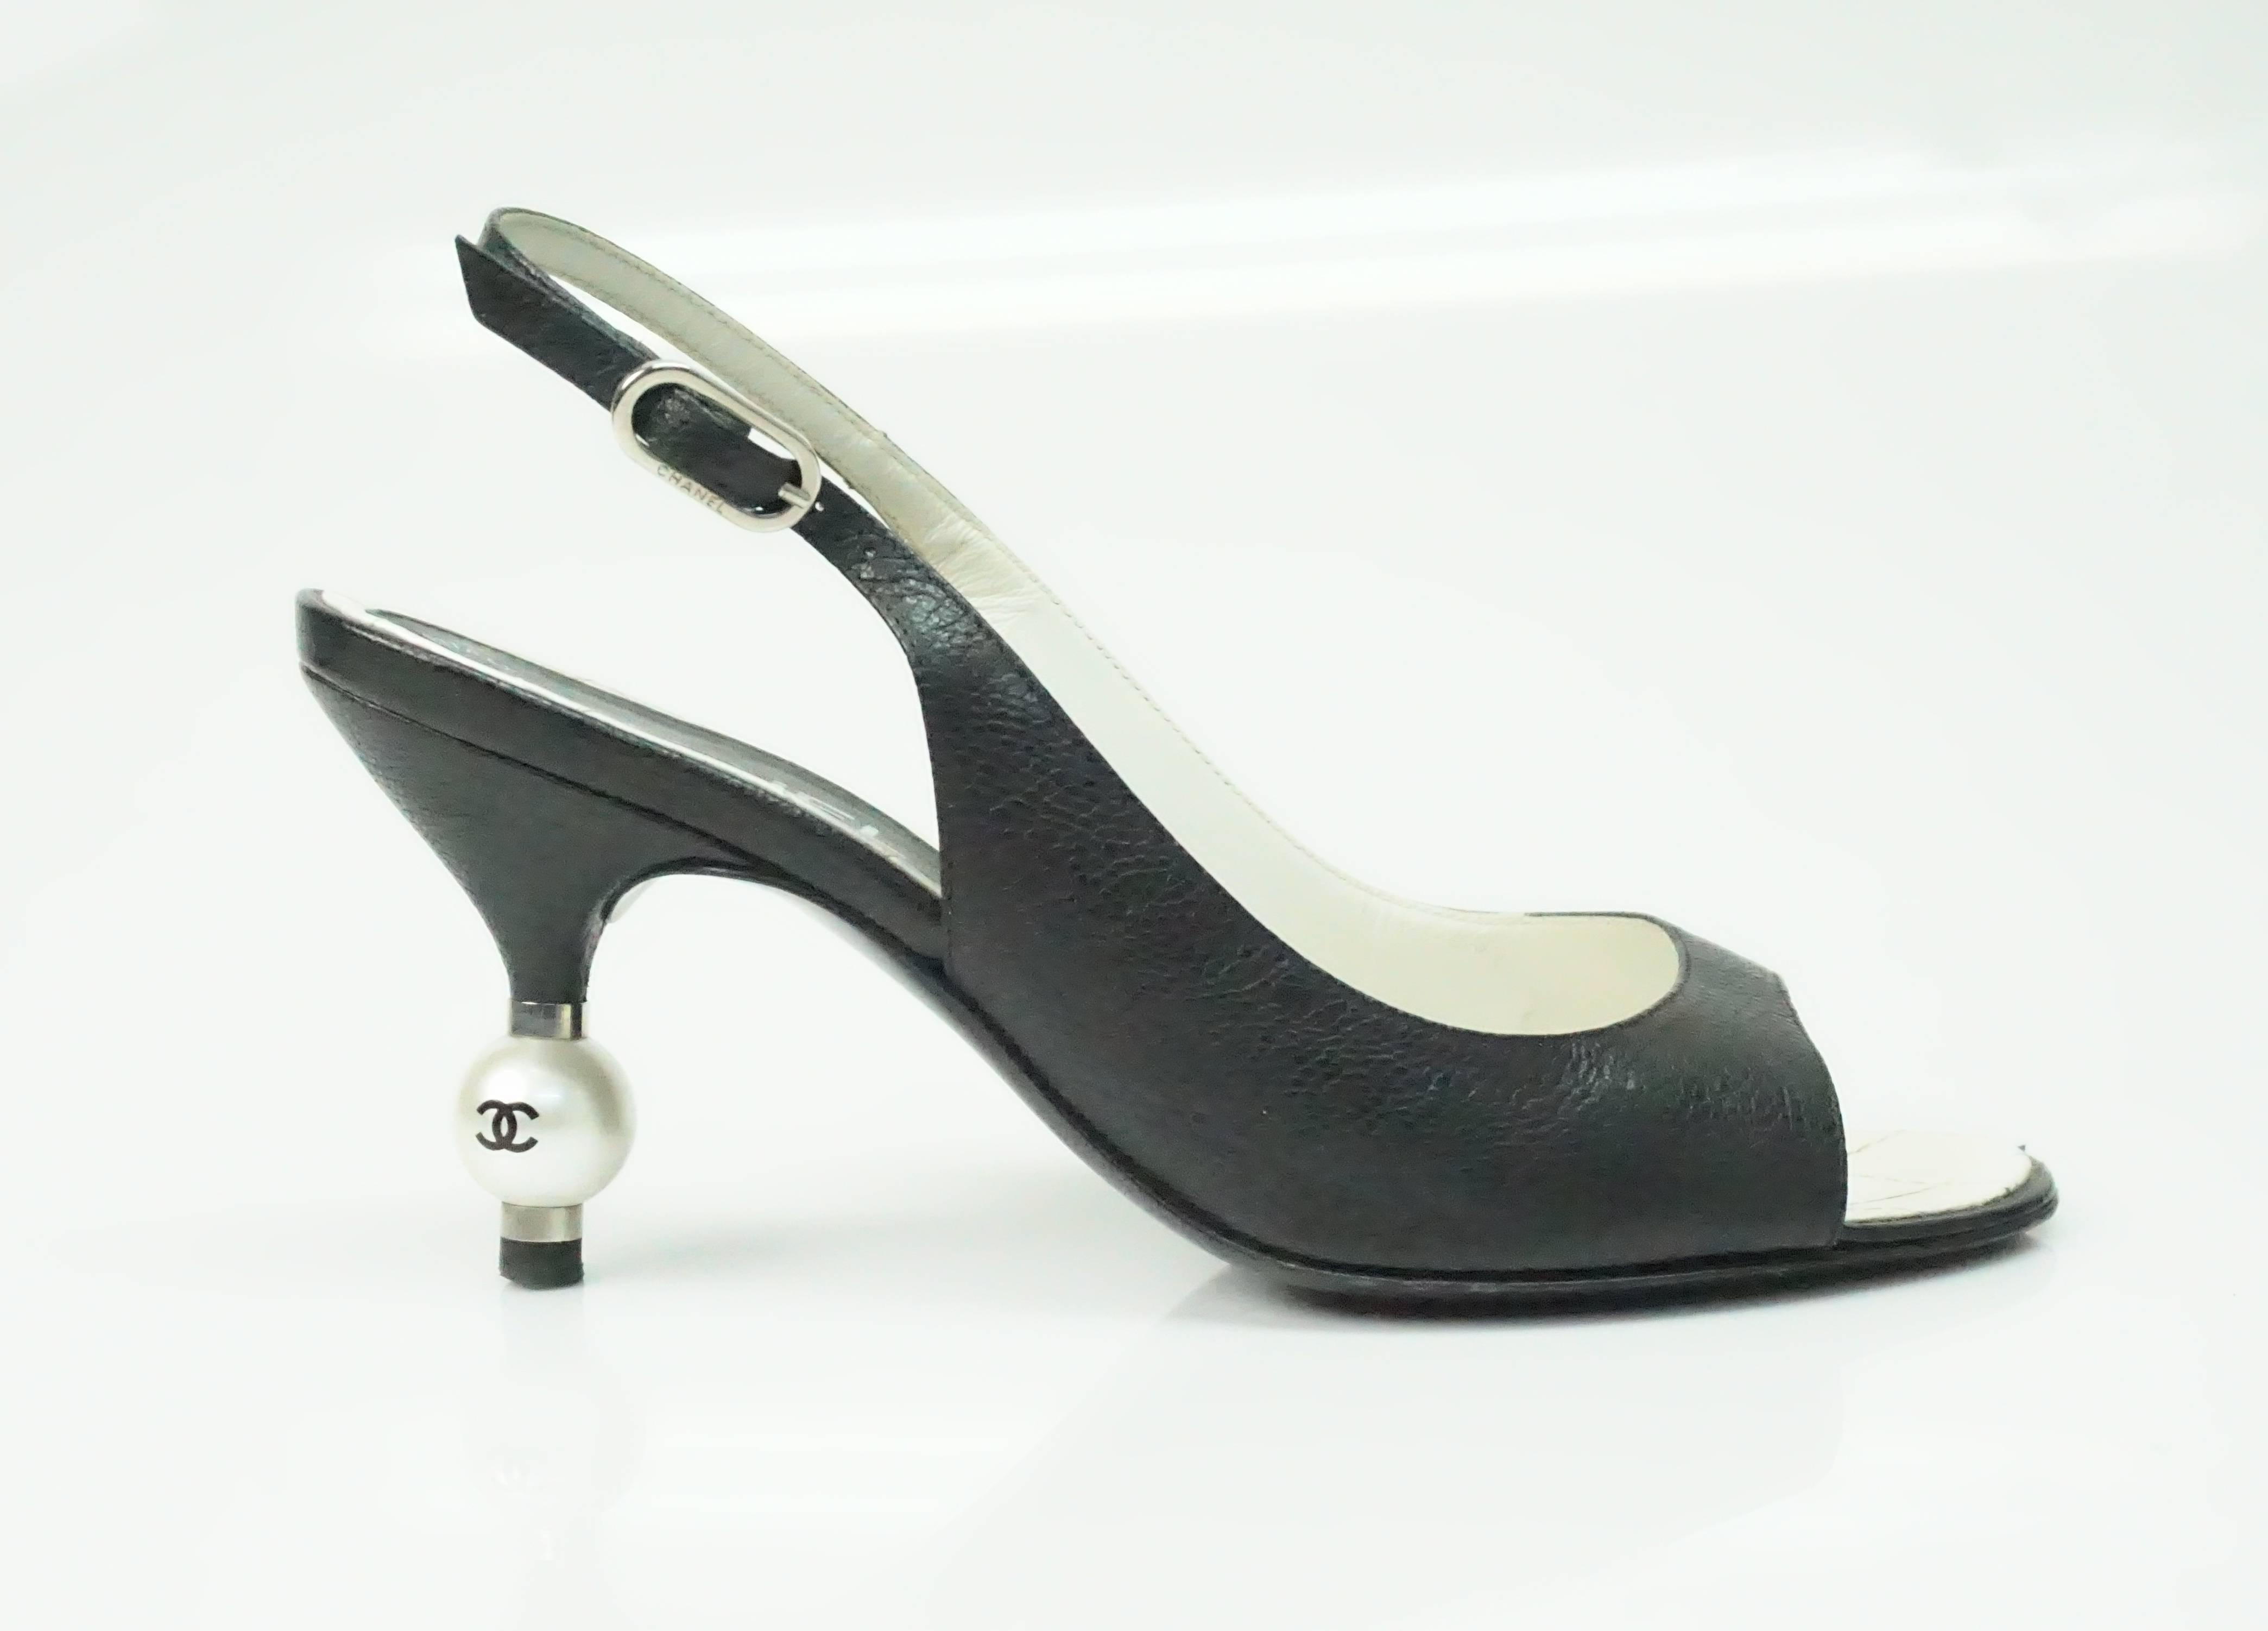 Chanel Black Slingback Heel w/ CC Pearl Heel - 36.5  This classic Chanel kitten heel is in good condition. There are some slight marks on the pearls and some minor scuffing to the front leather trim. 
The heel is 3